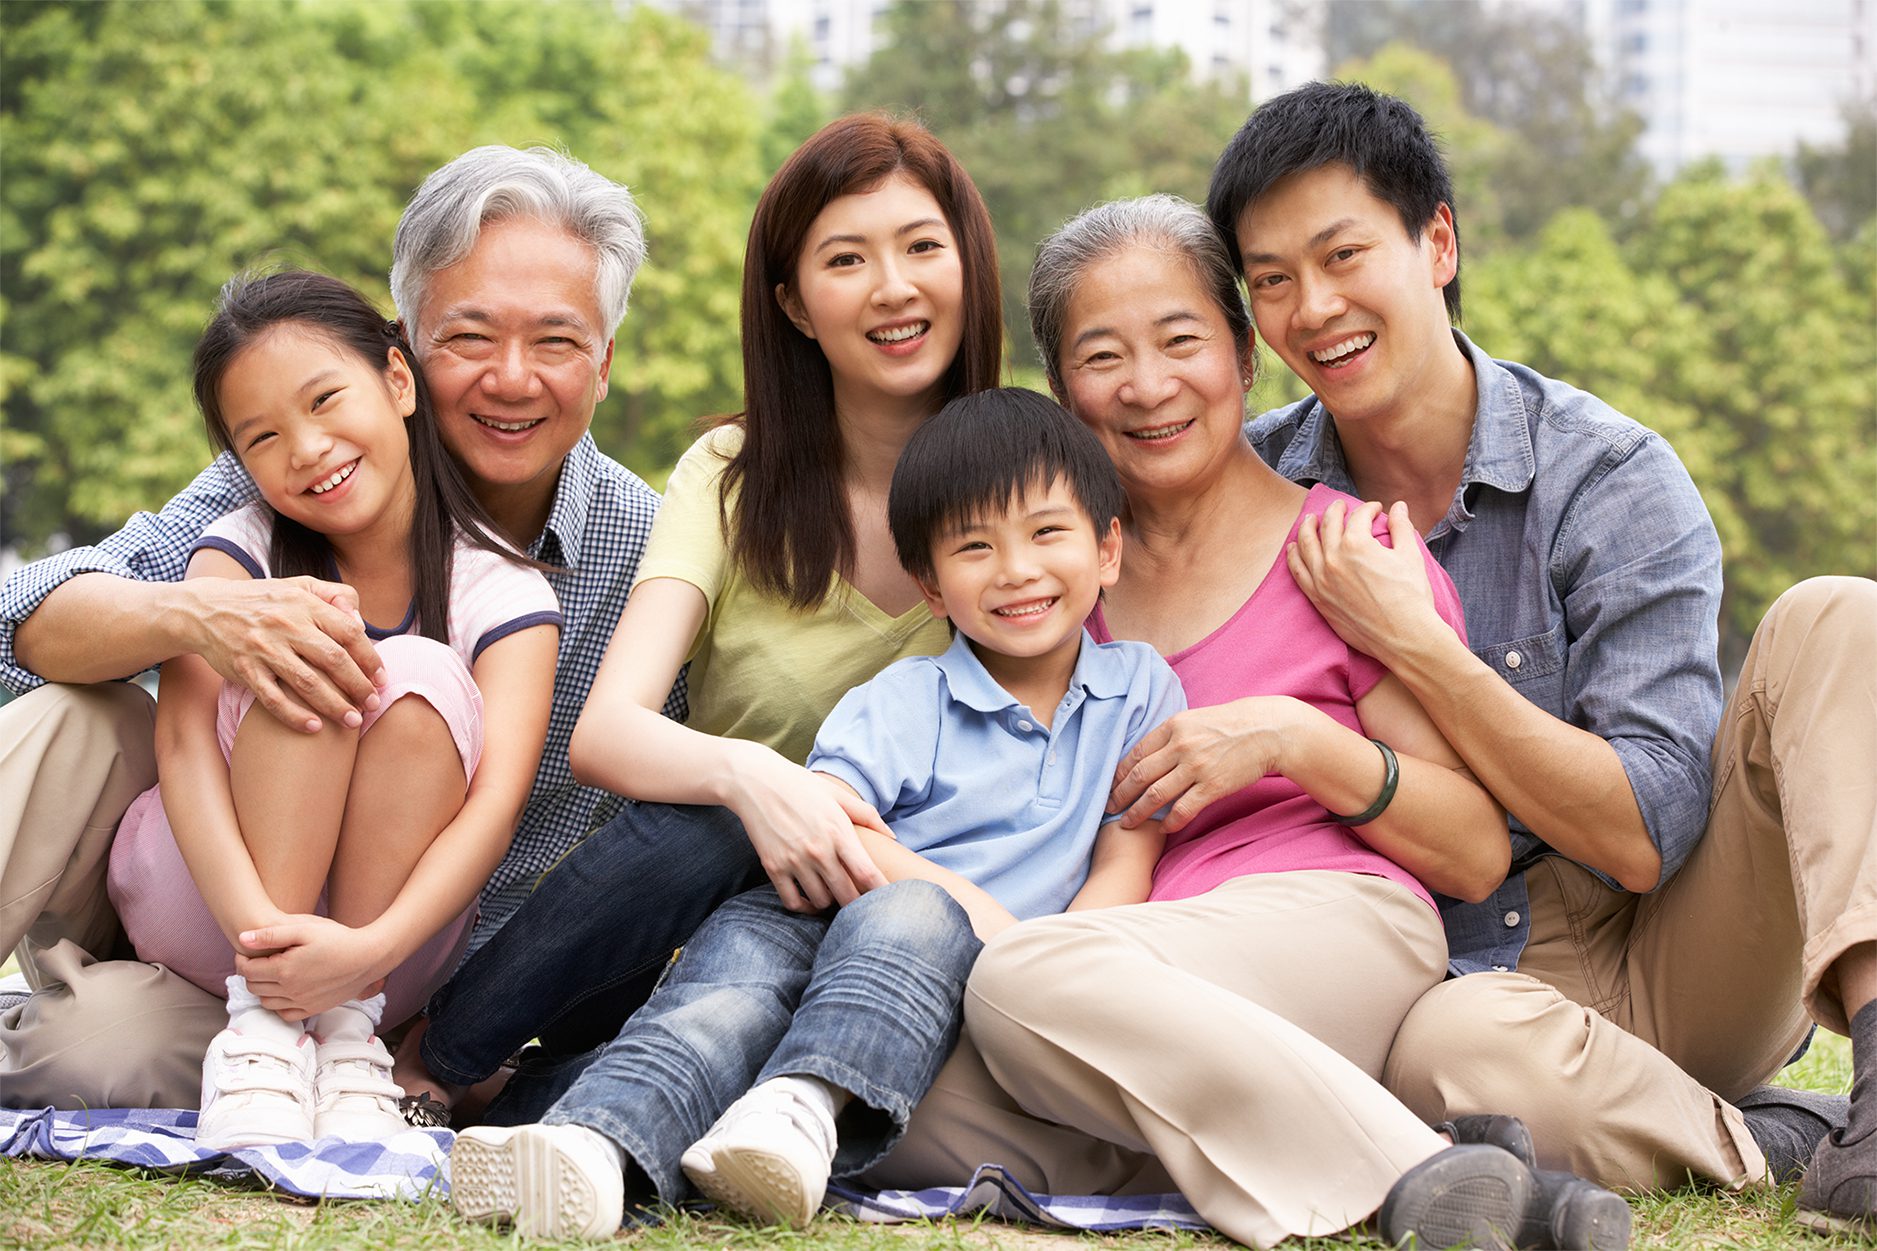 Passing wealth through generations with life insurance